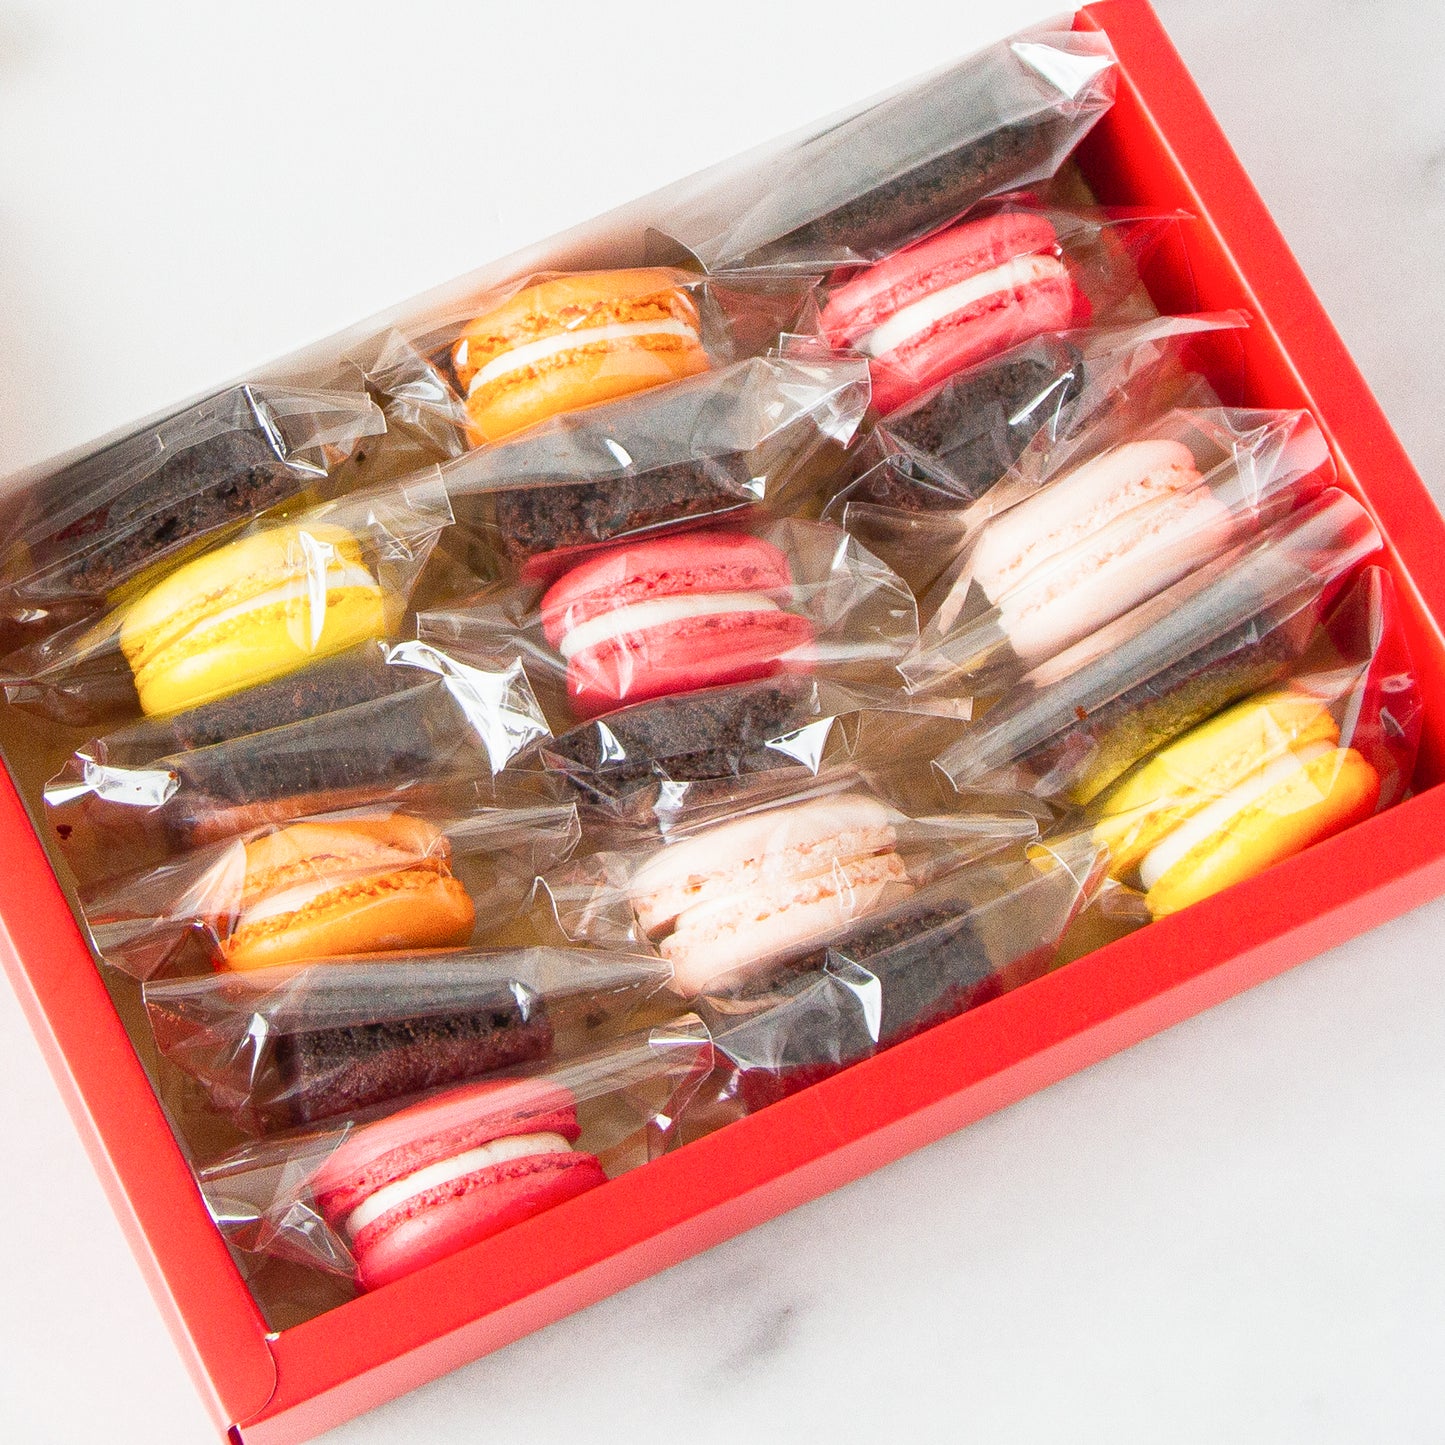 Year Of The Dragon! | 18 pcs macarons and brownies gift set |$31.80 nett only